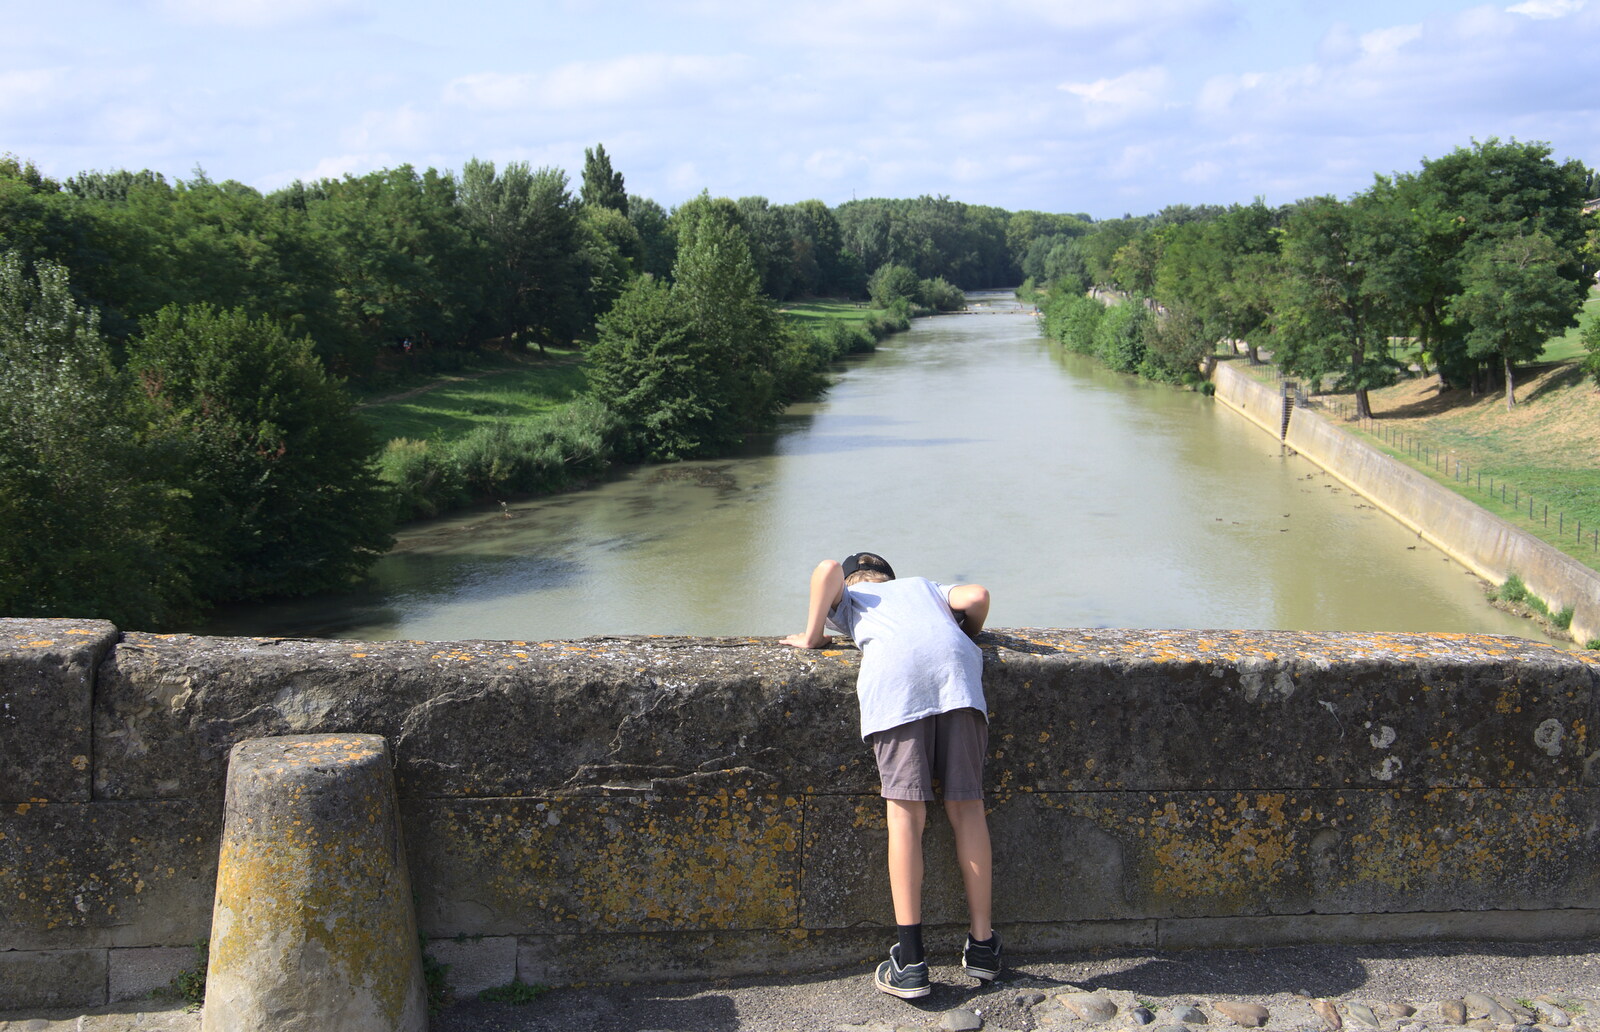 Fred peers over the side of the Pont Vieux from A Trip to Carcassonne, Aude, France - 8th August 2018